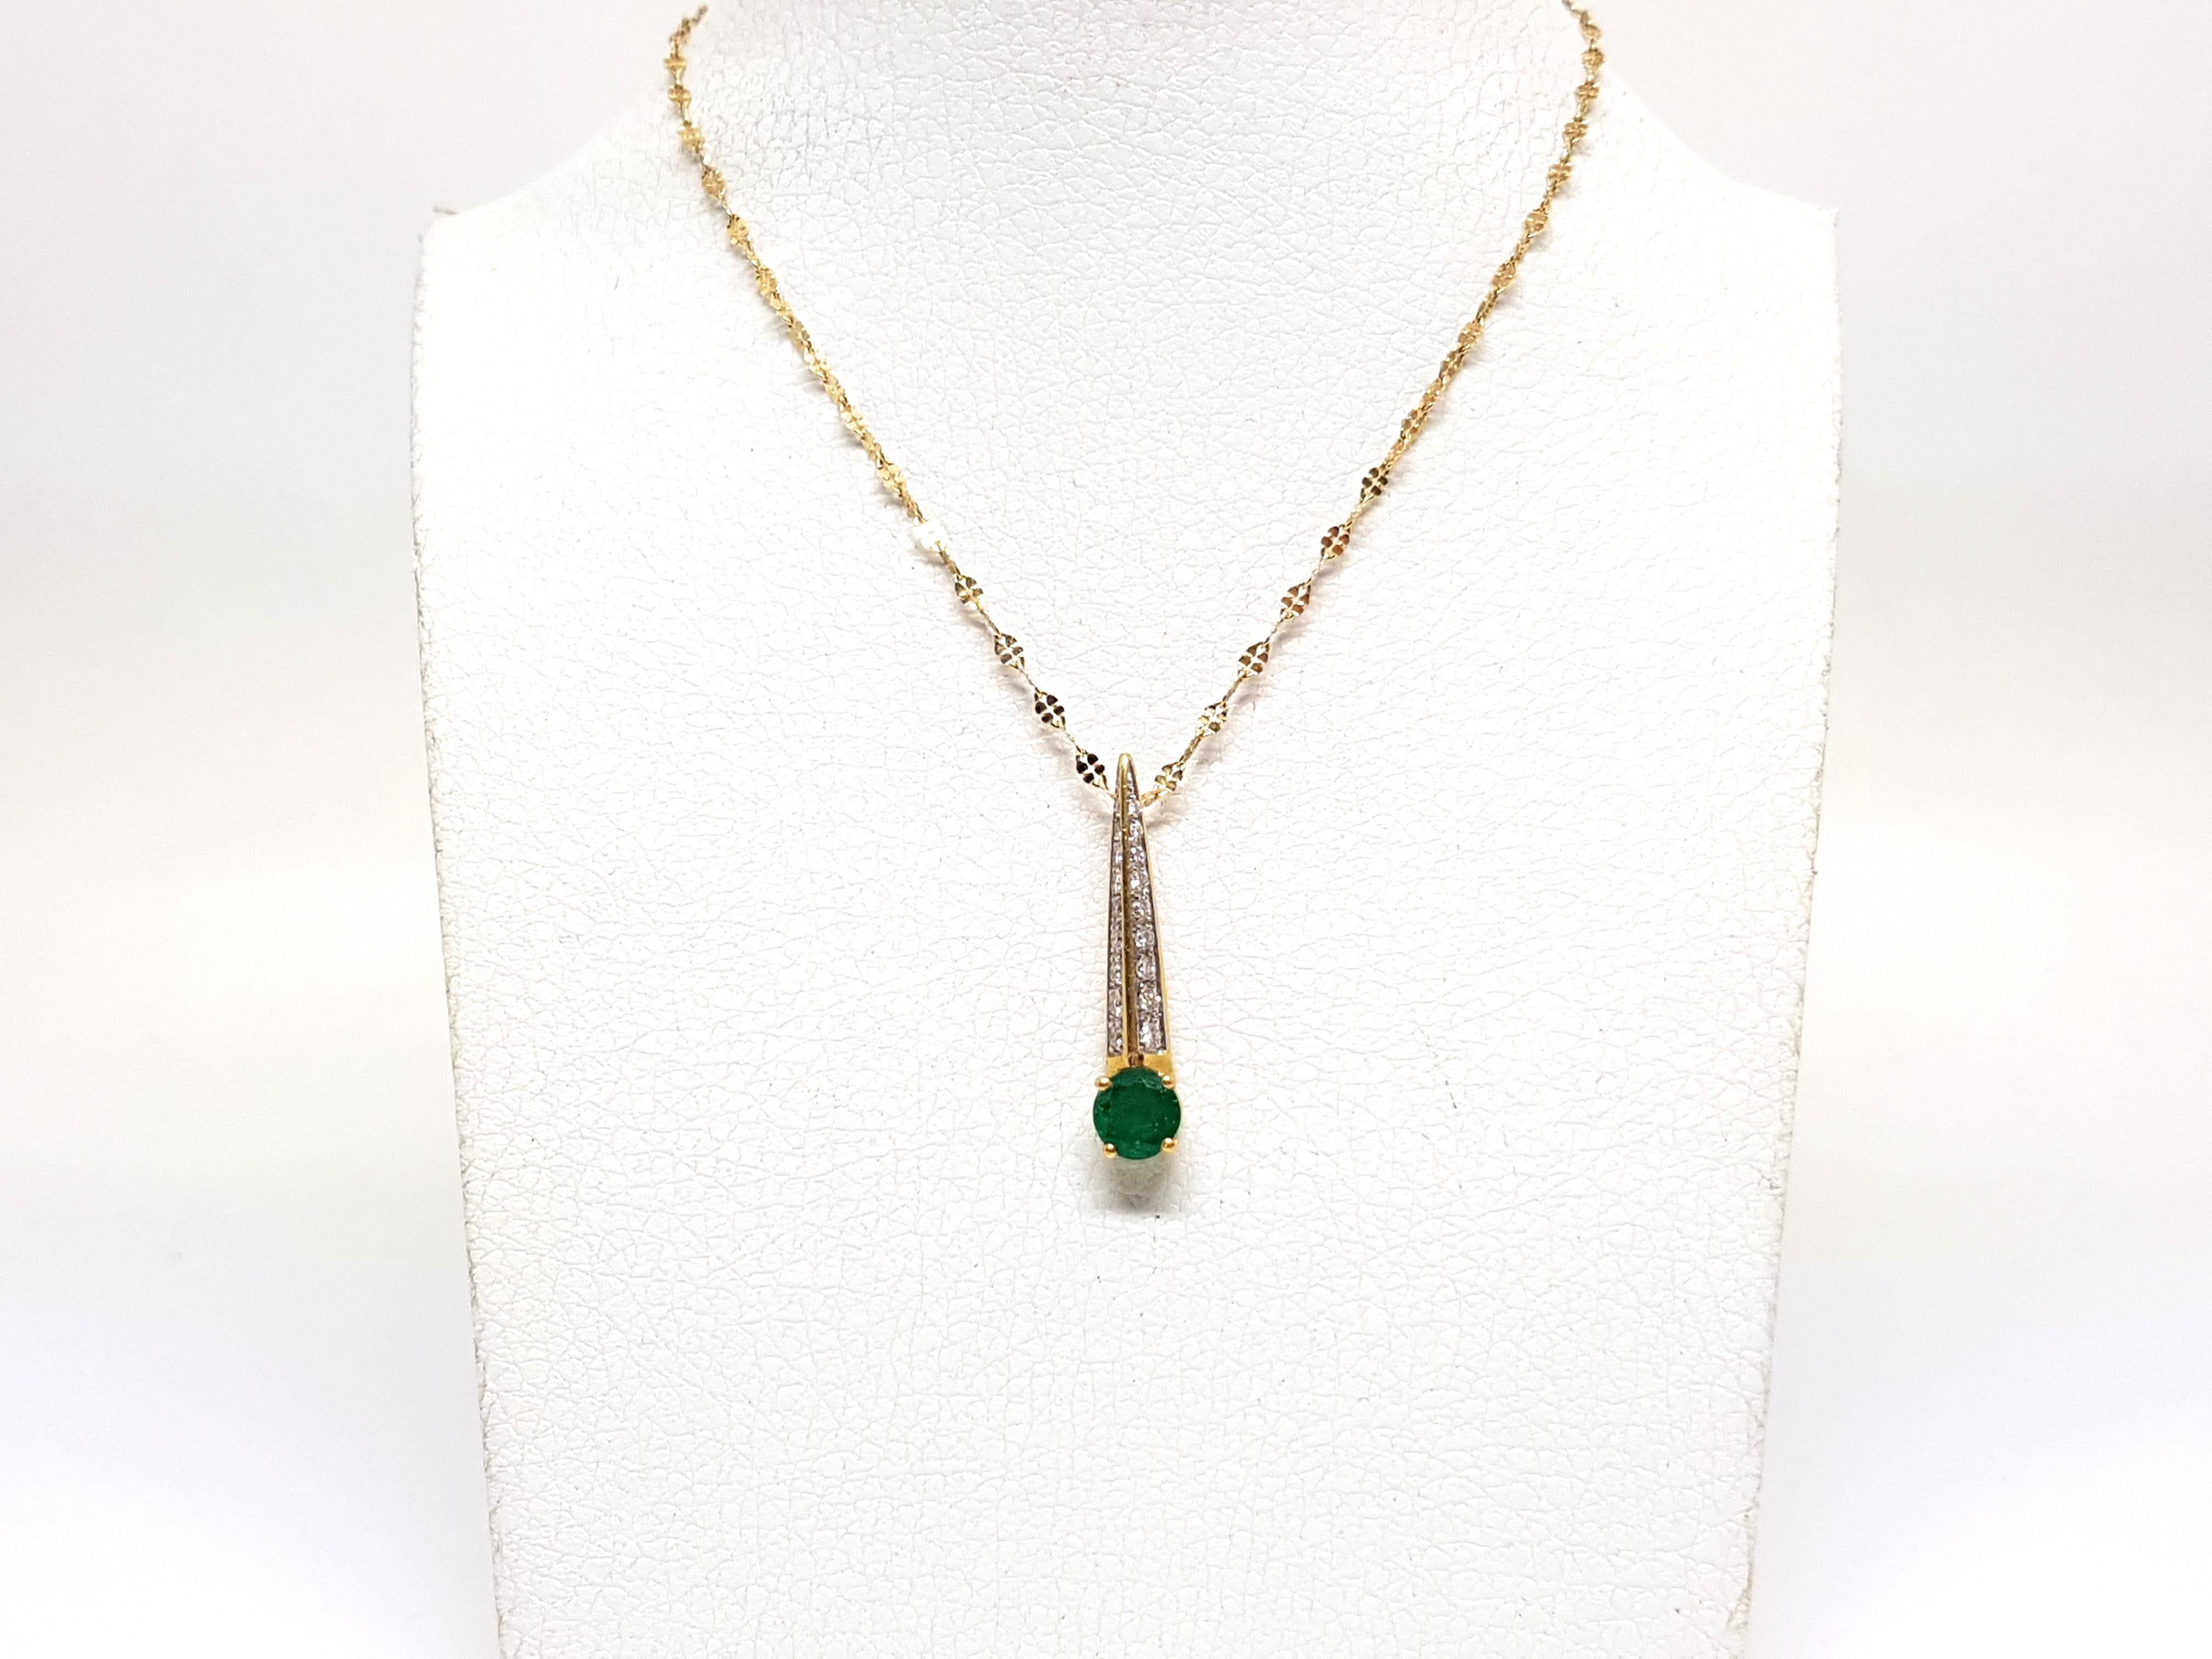 Gold: 18 Karat Yellow & White Gold 
Weight: 2.82 grams.
Diamonds: 0.36 ct. Color: G clarity: VS
Emerald: 0.70ct.
Length Necklace: choose between 15, 16.5, 17.7 or 19.6cm.
Length Pendant: 0.98 Inches.
Width Pendant: 0.20 inches.
All our jewellery